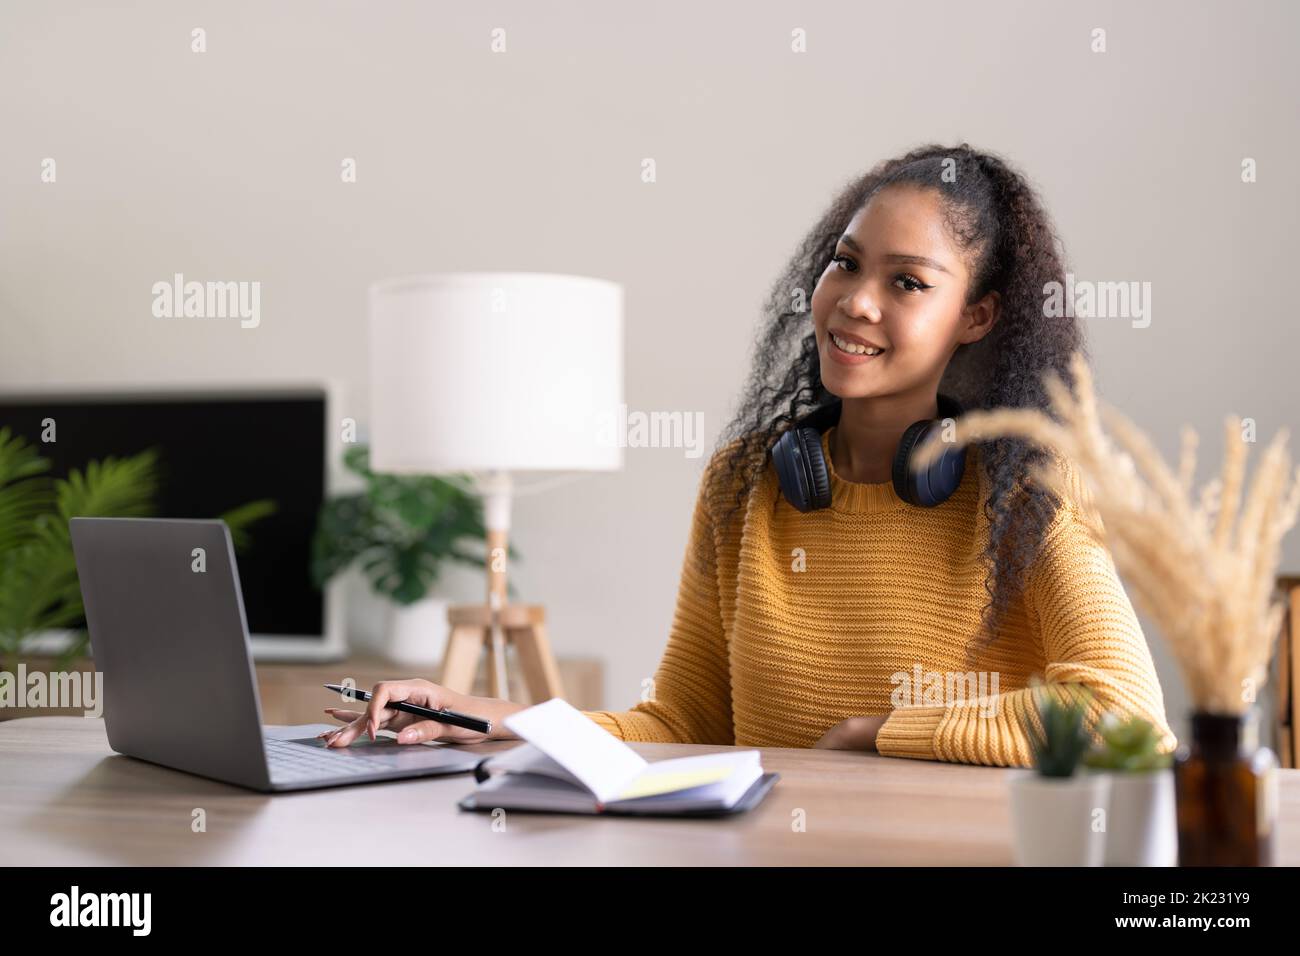 Young woman using laptop computer at office. Student girl working at home. Work or study from home, freelance, business, lifestyle concept Stock Photo